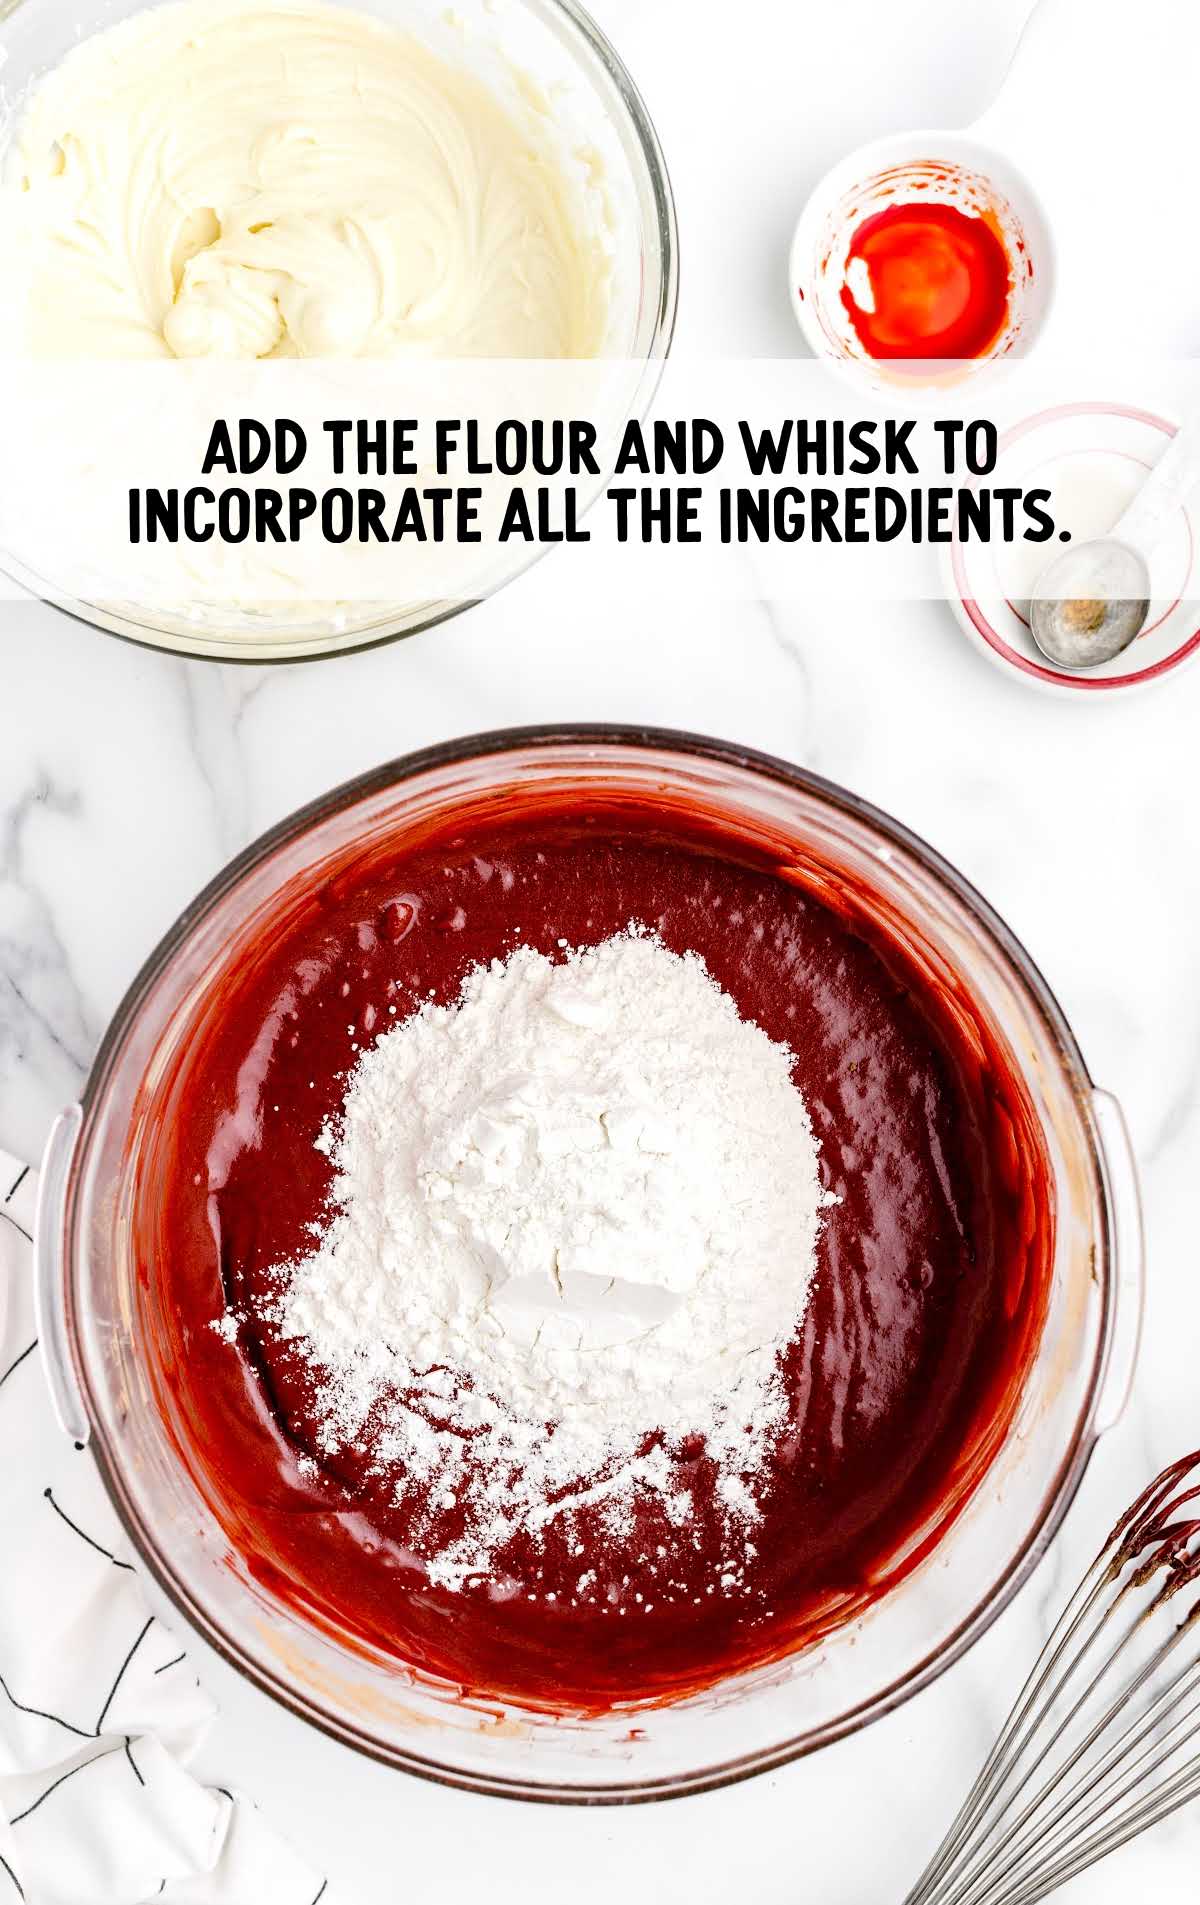 flour added incorporated with all the ingredients and whisked in a bowl